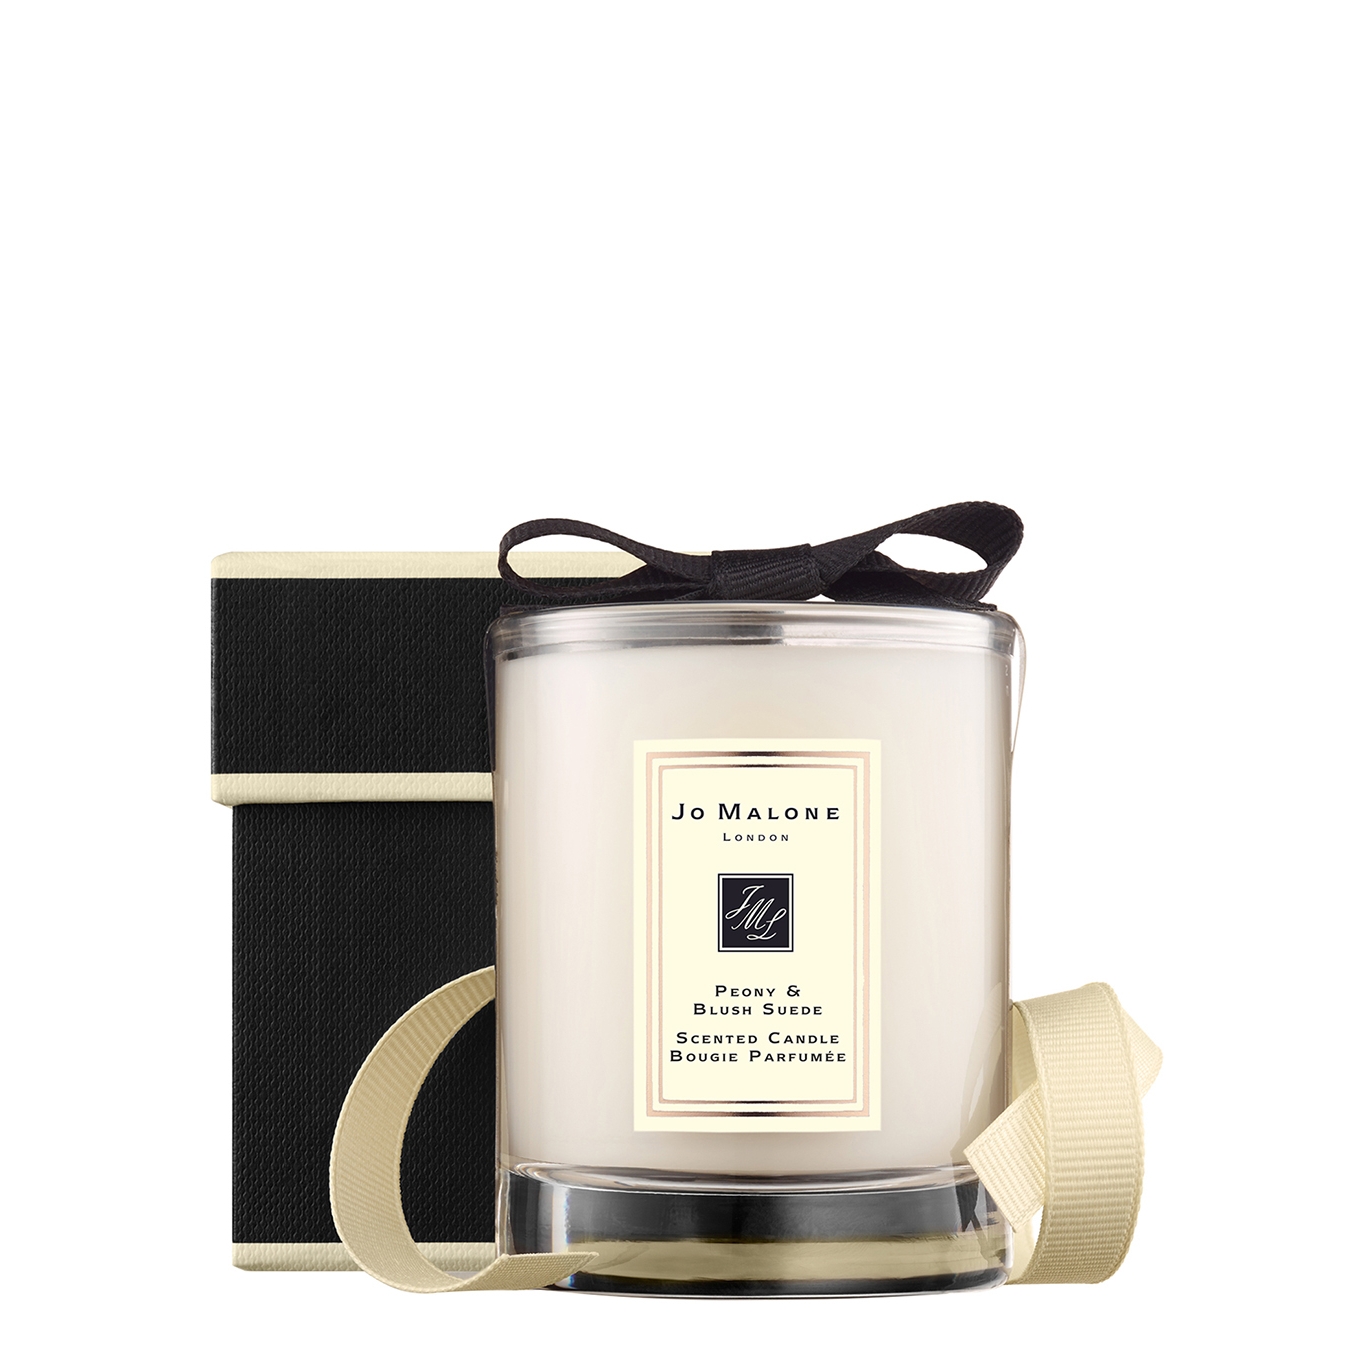 JO Malone London Peony Blush Suede Travel Candle, Fragrance, Floral